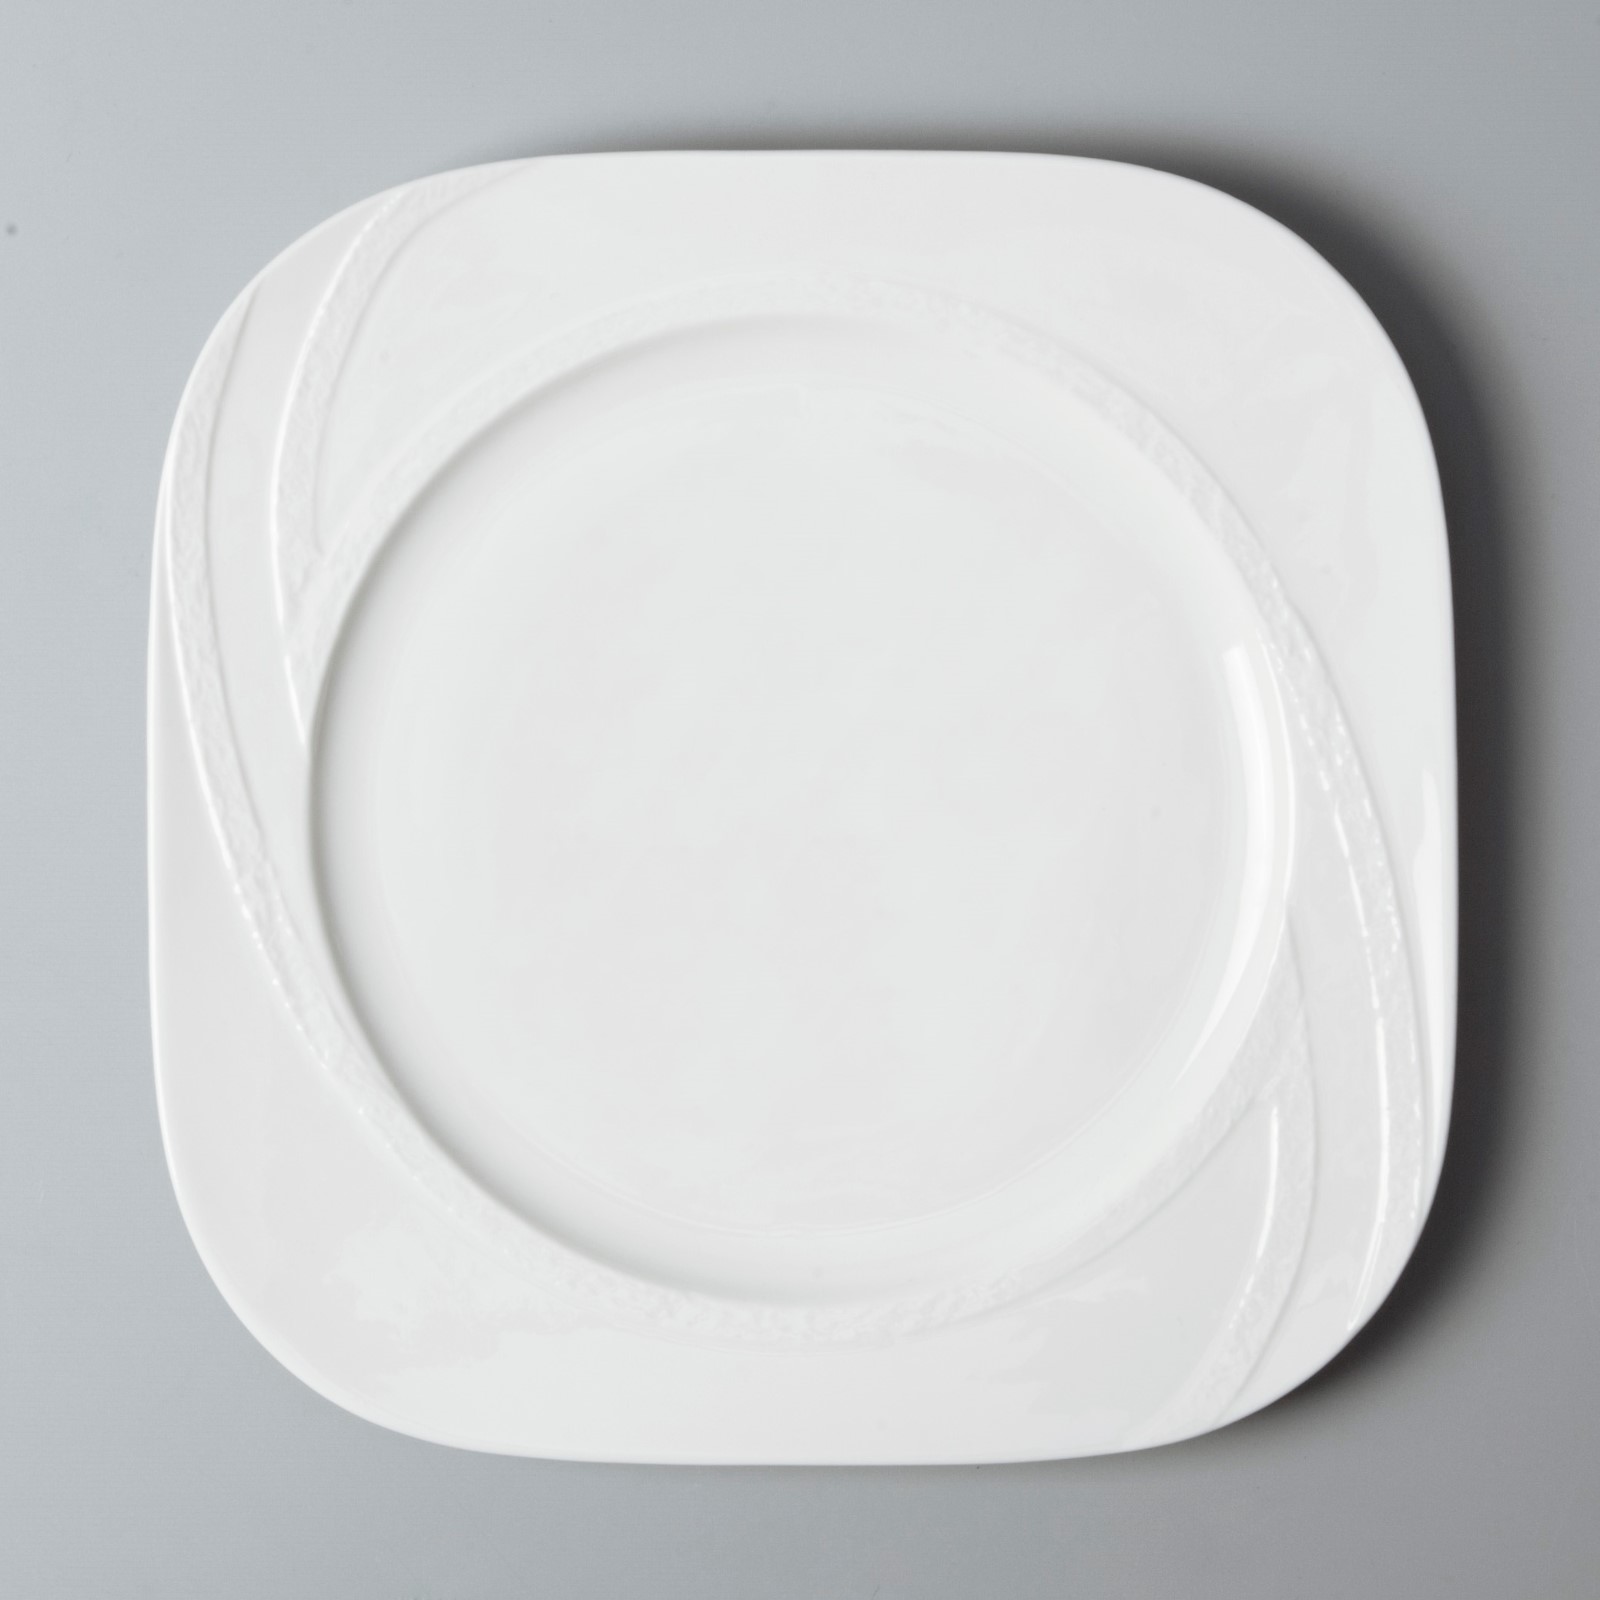 sample hotel crockery online india manufacturer for kitchen Two Eight-2